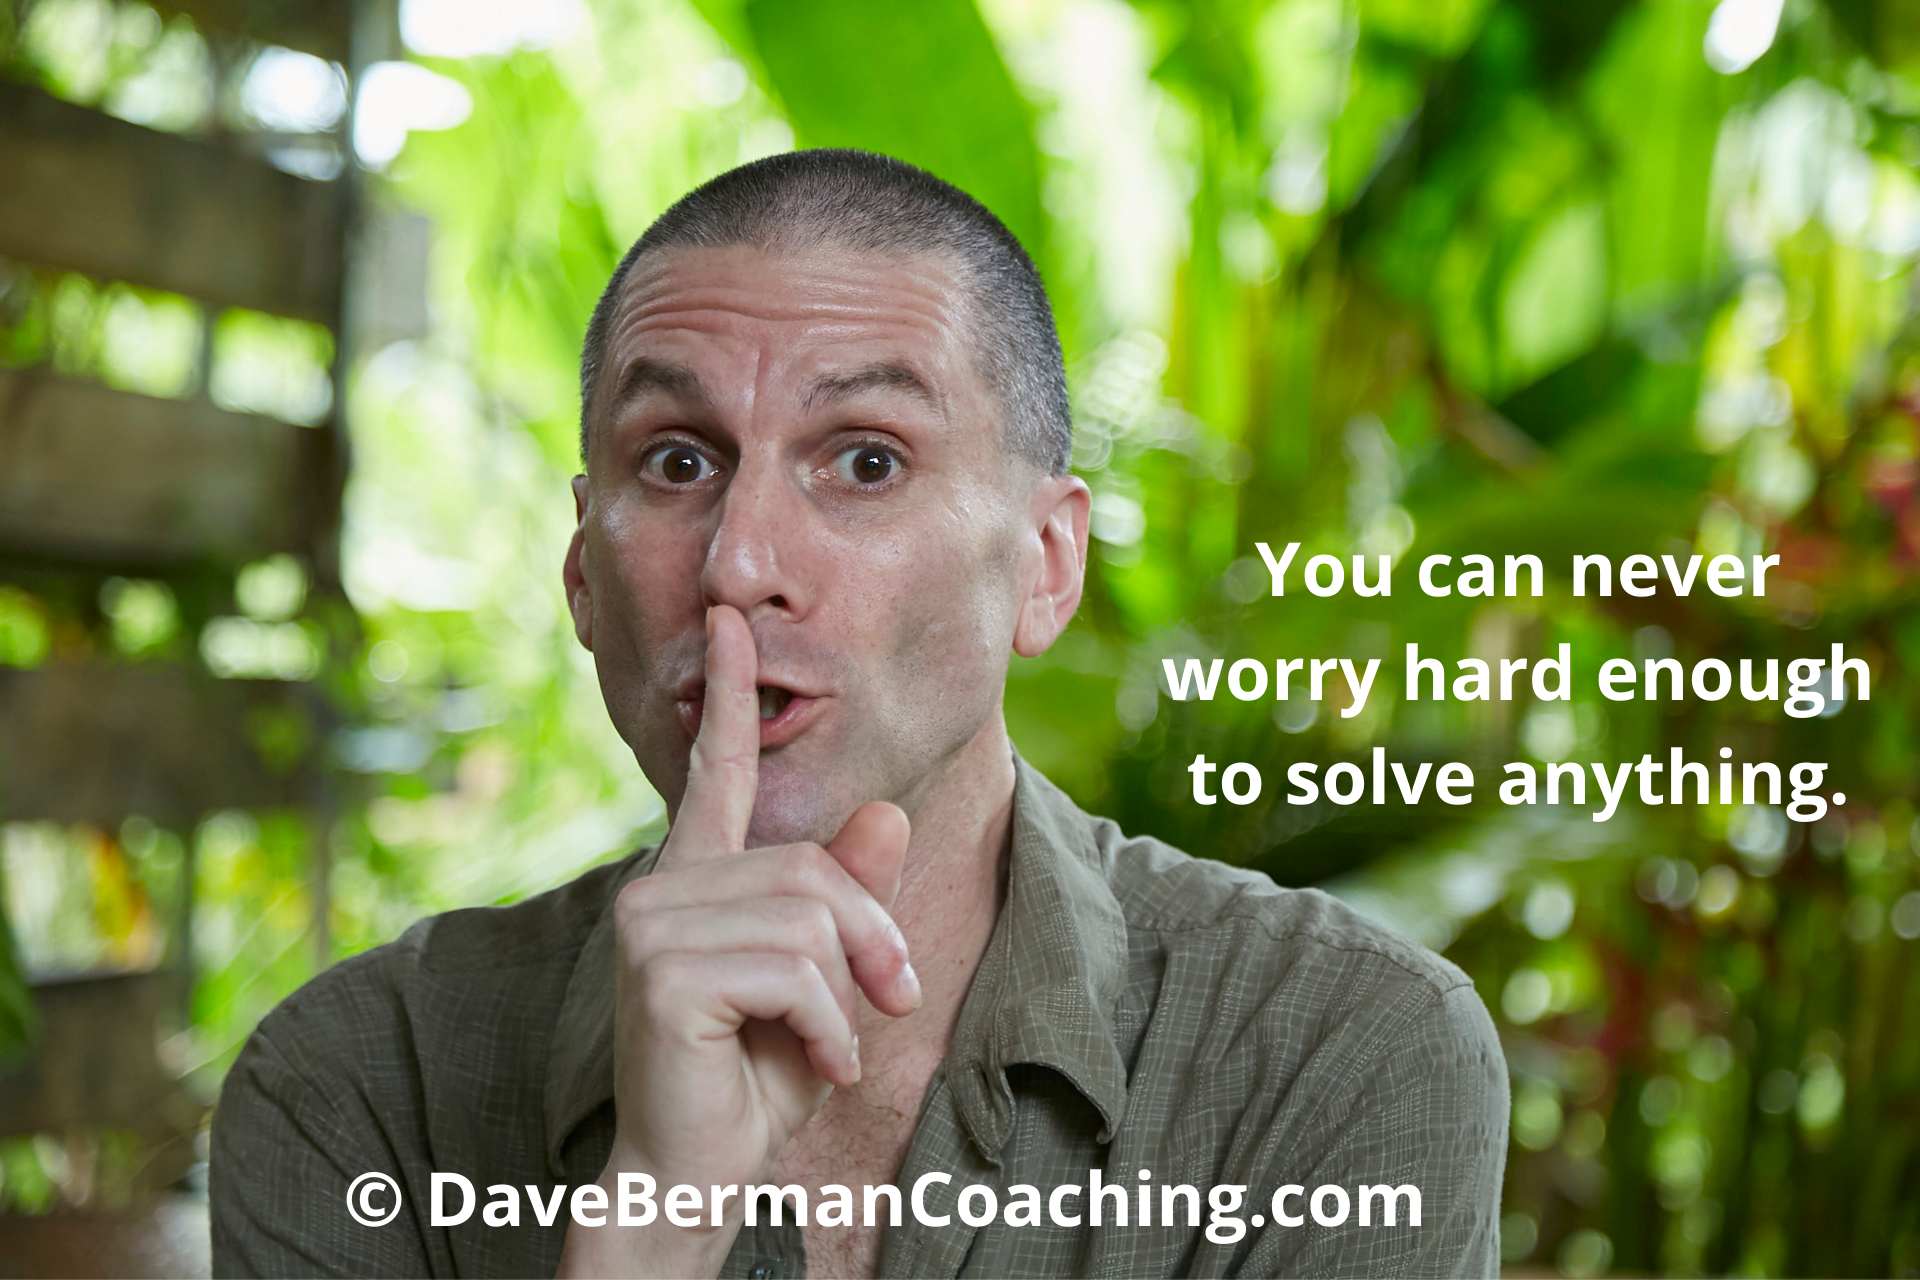 You can never worry hard enough to solve anything - DaveBermanCoaching.com